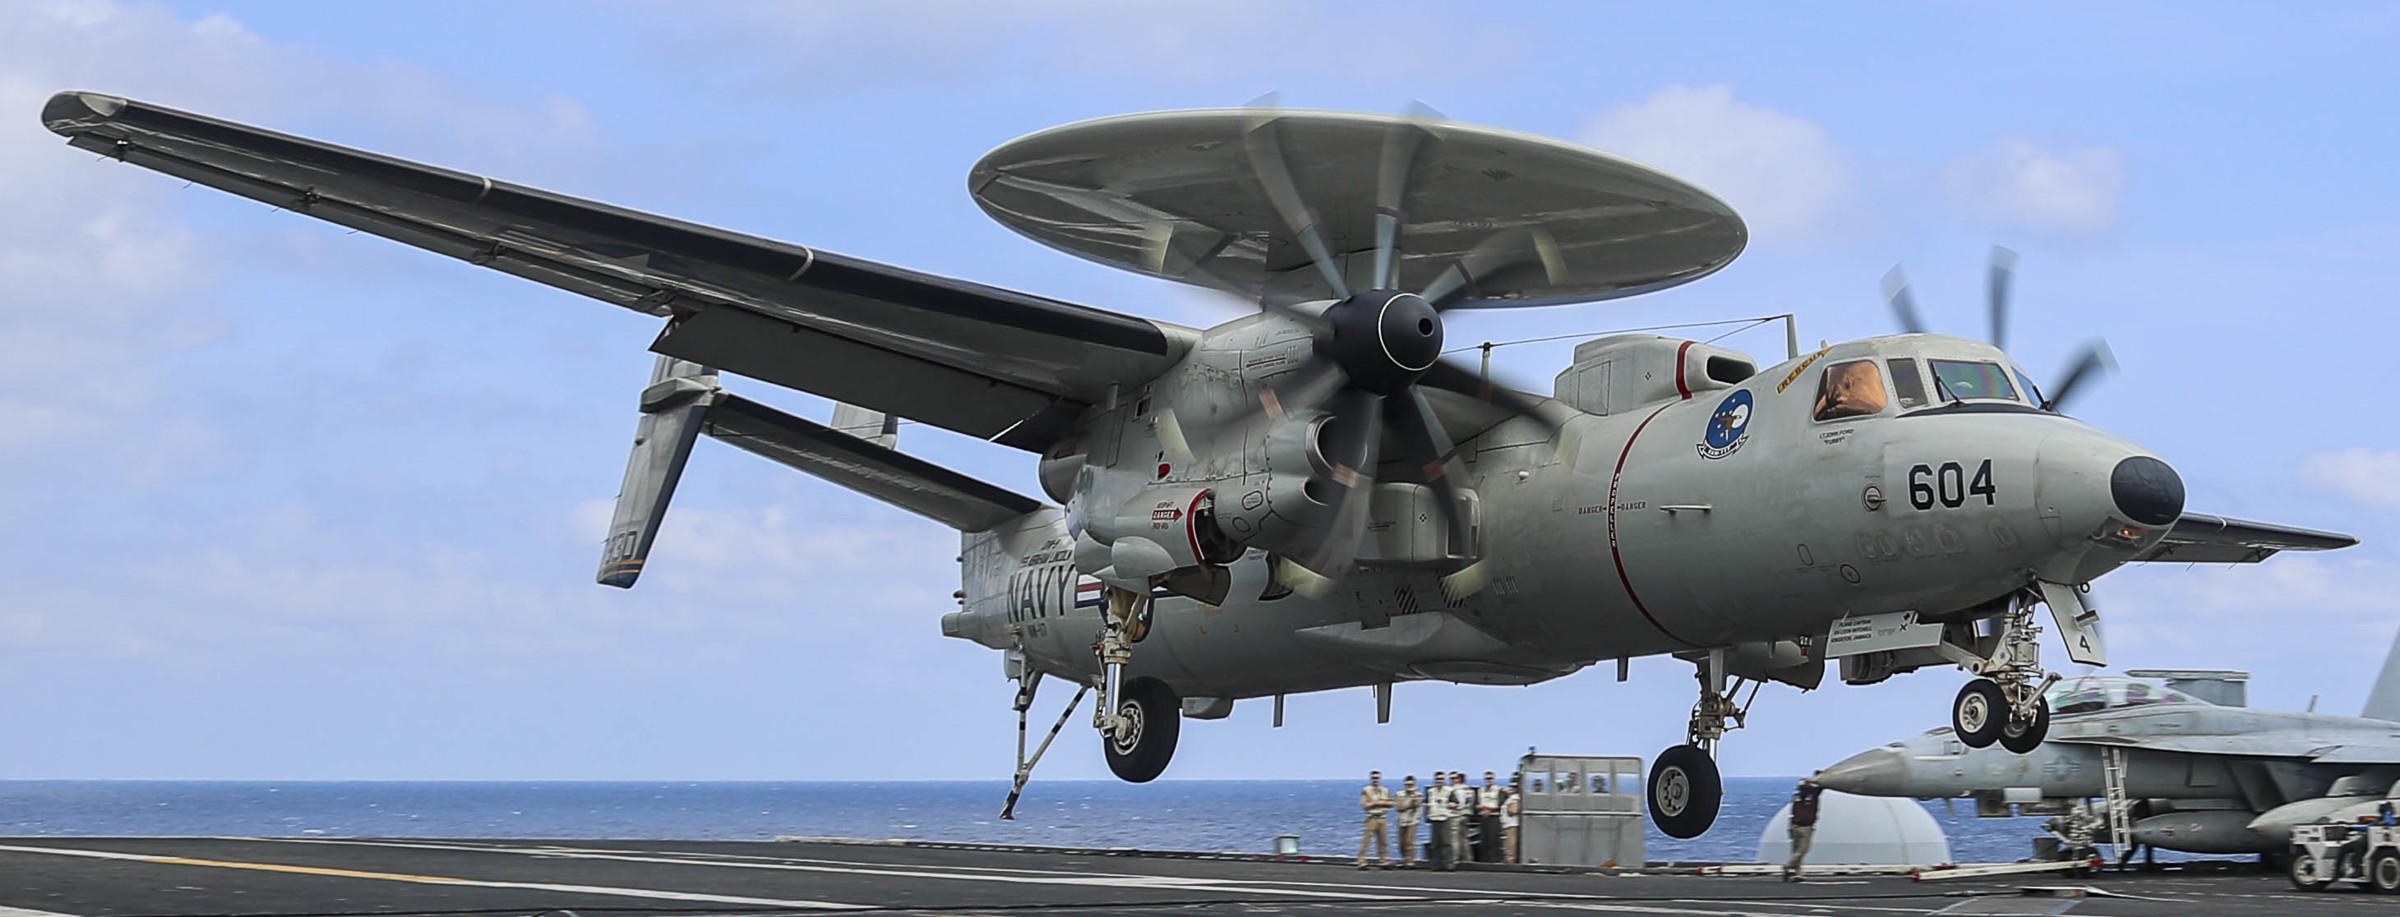 vaw-117 wallbangers airborne command and control squadron navy e-2d advanced hawkeye cvw-9 uss abraham lincoln cvn-72 18